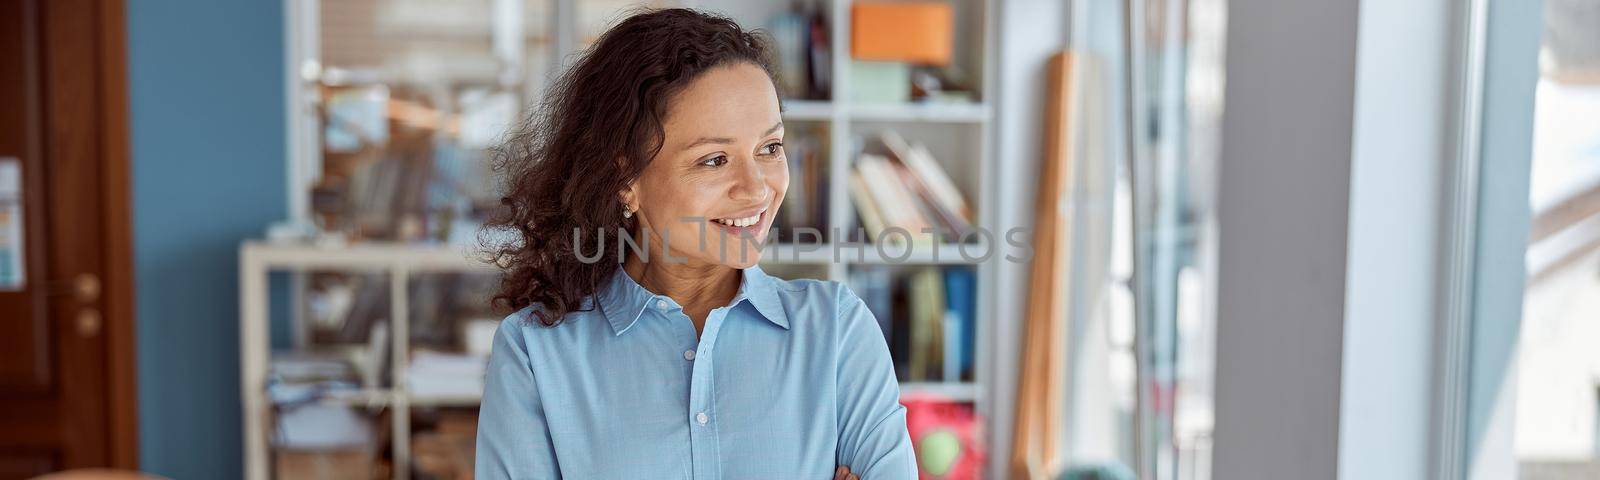 young beautiful smiling professional african american teacher portrait in school classroom.